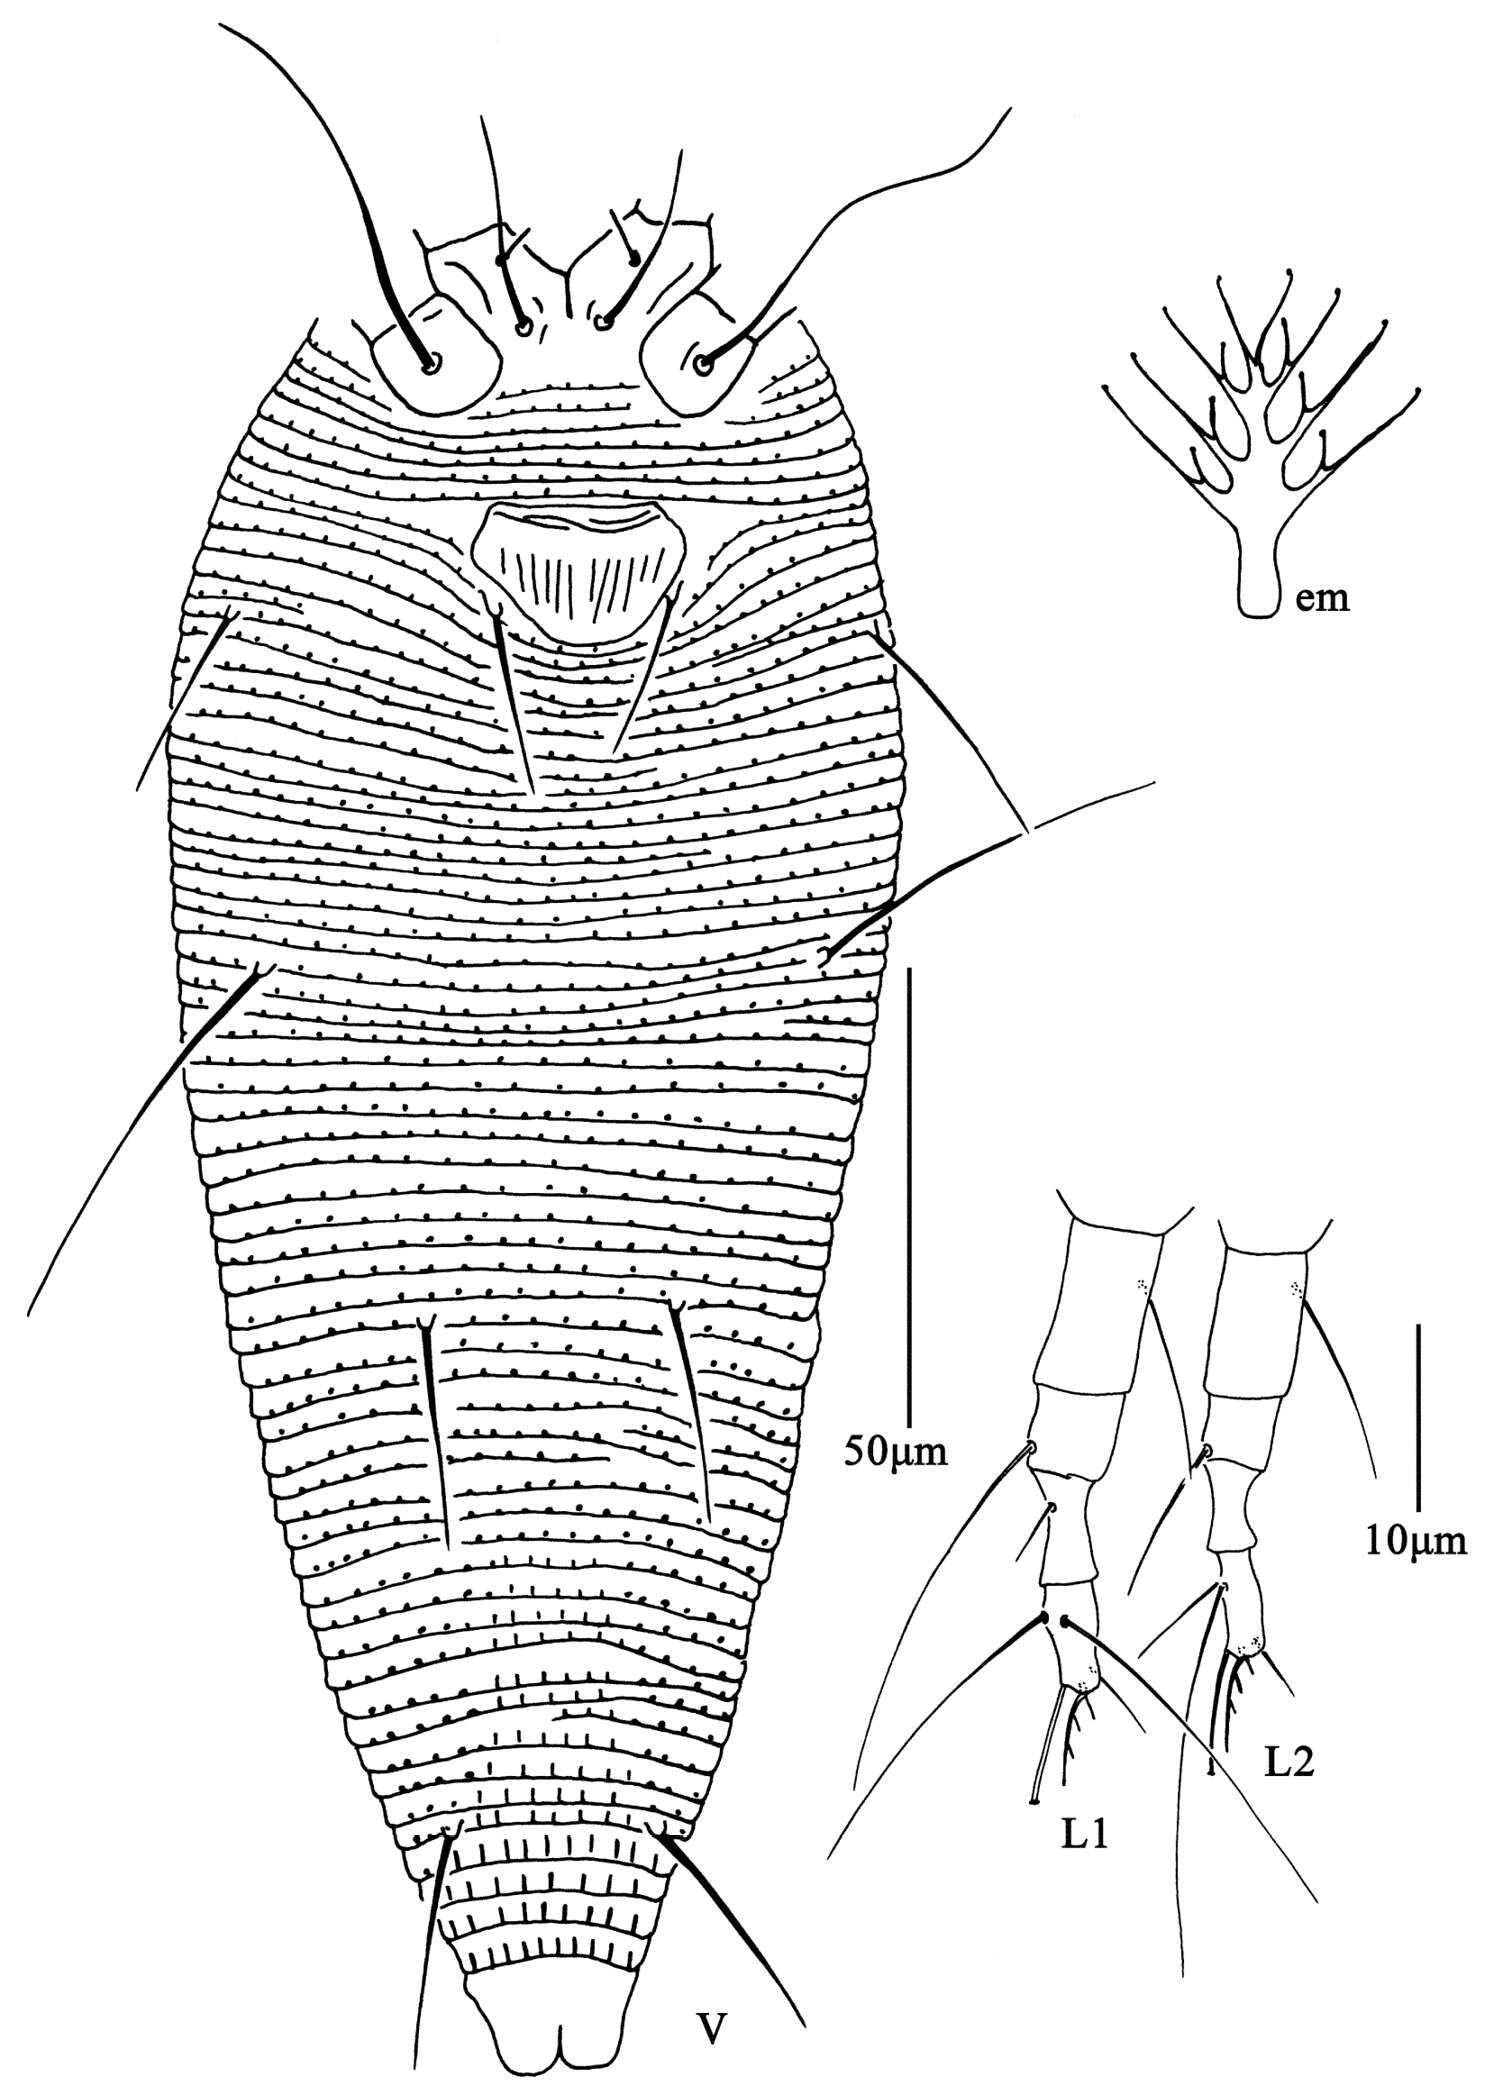 Image of Aculus